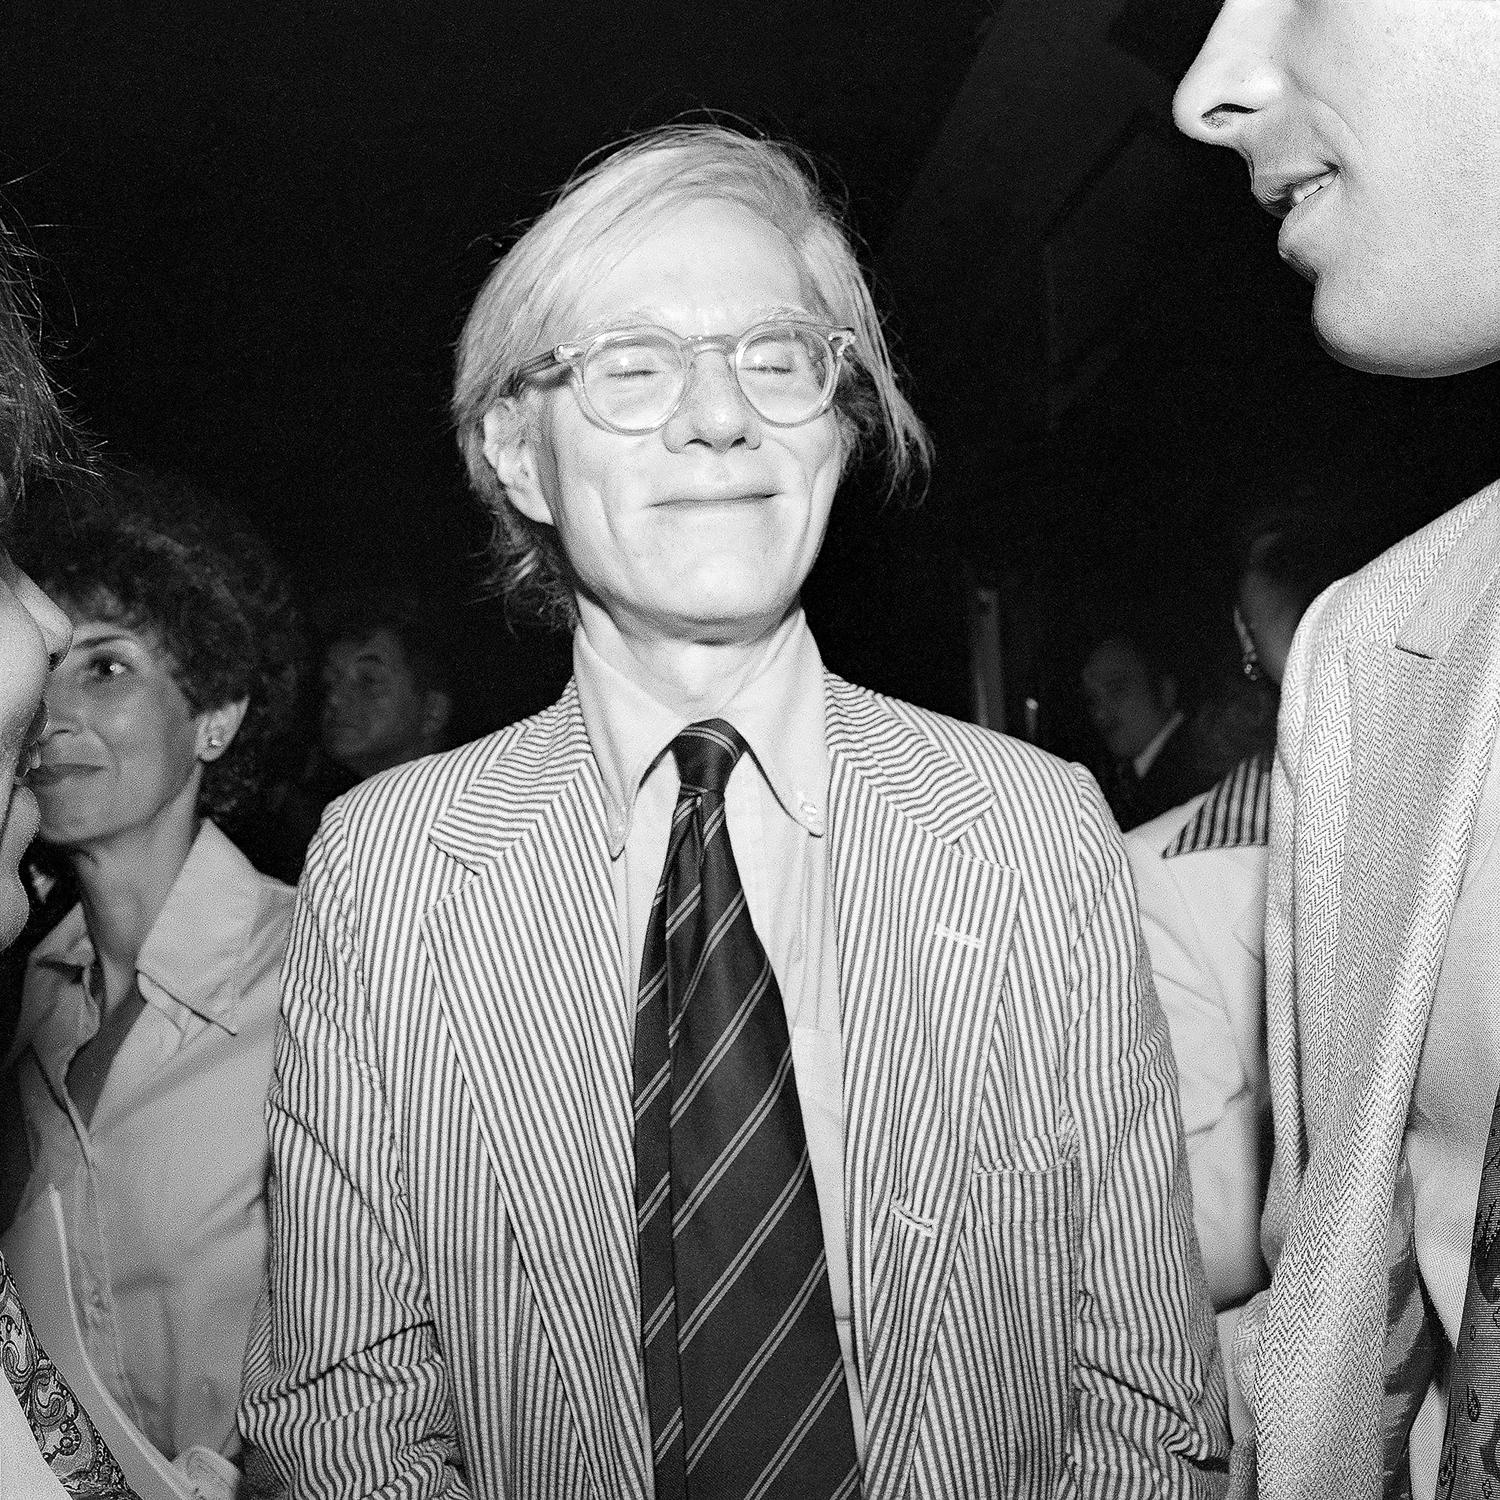 Meryl Meisler Portrait Photograph - Andy Warhol Smiling with Eyes Closed, Studio 54